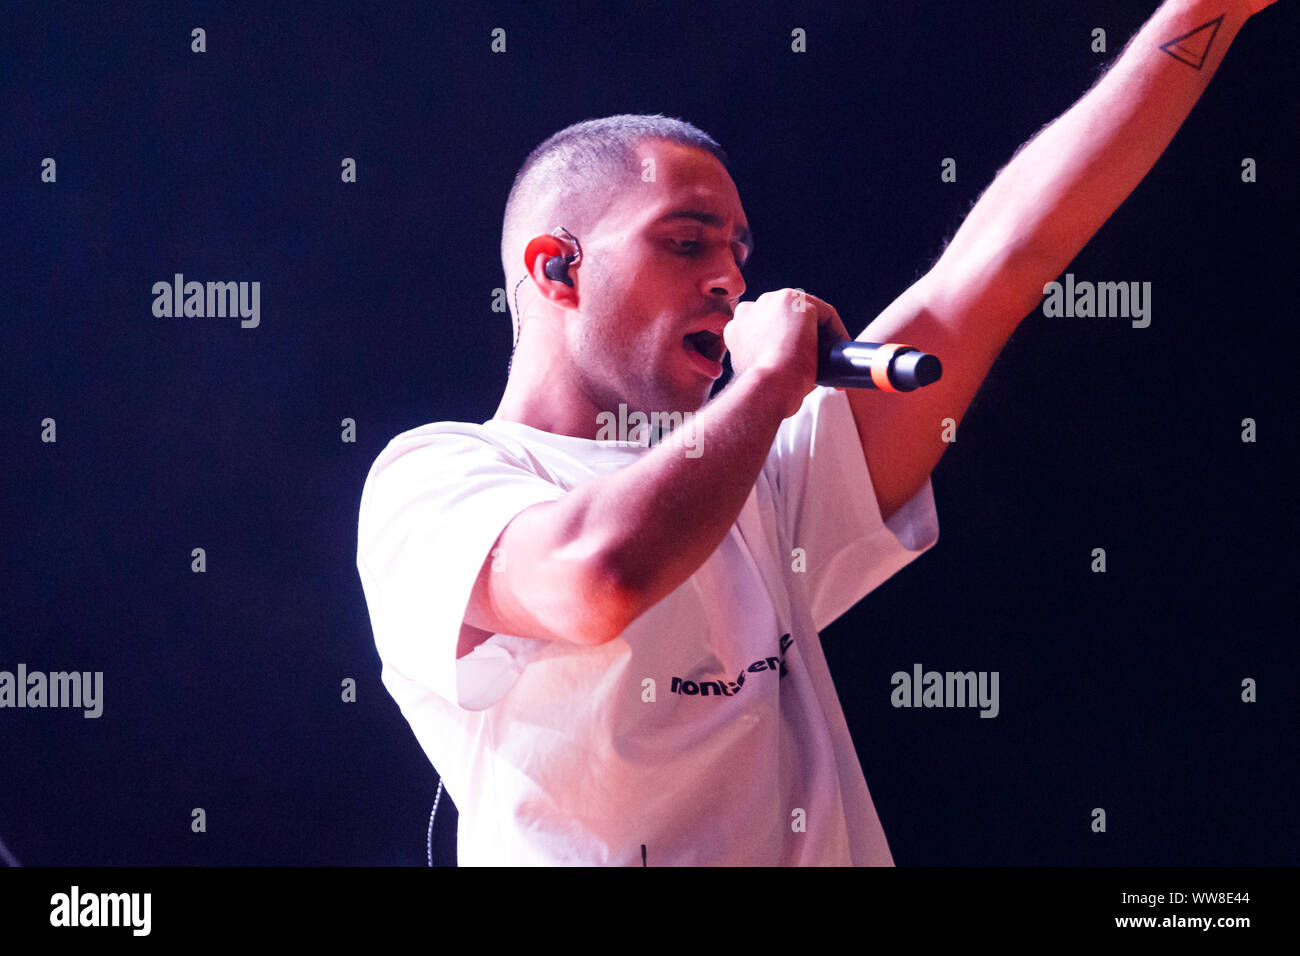 Bologna, ITALY. 13 September, 2019. Italian singer-songwriter Mahmood performs live on September 13, 2019 in Bologna, Italy. Credit: Massimiliano Donati/Alamy Live News Stock Photo